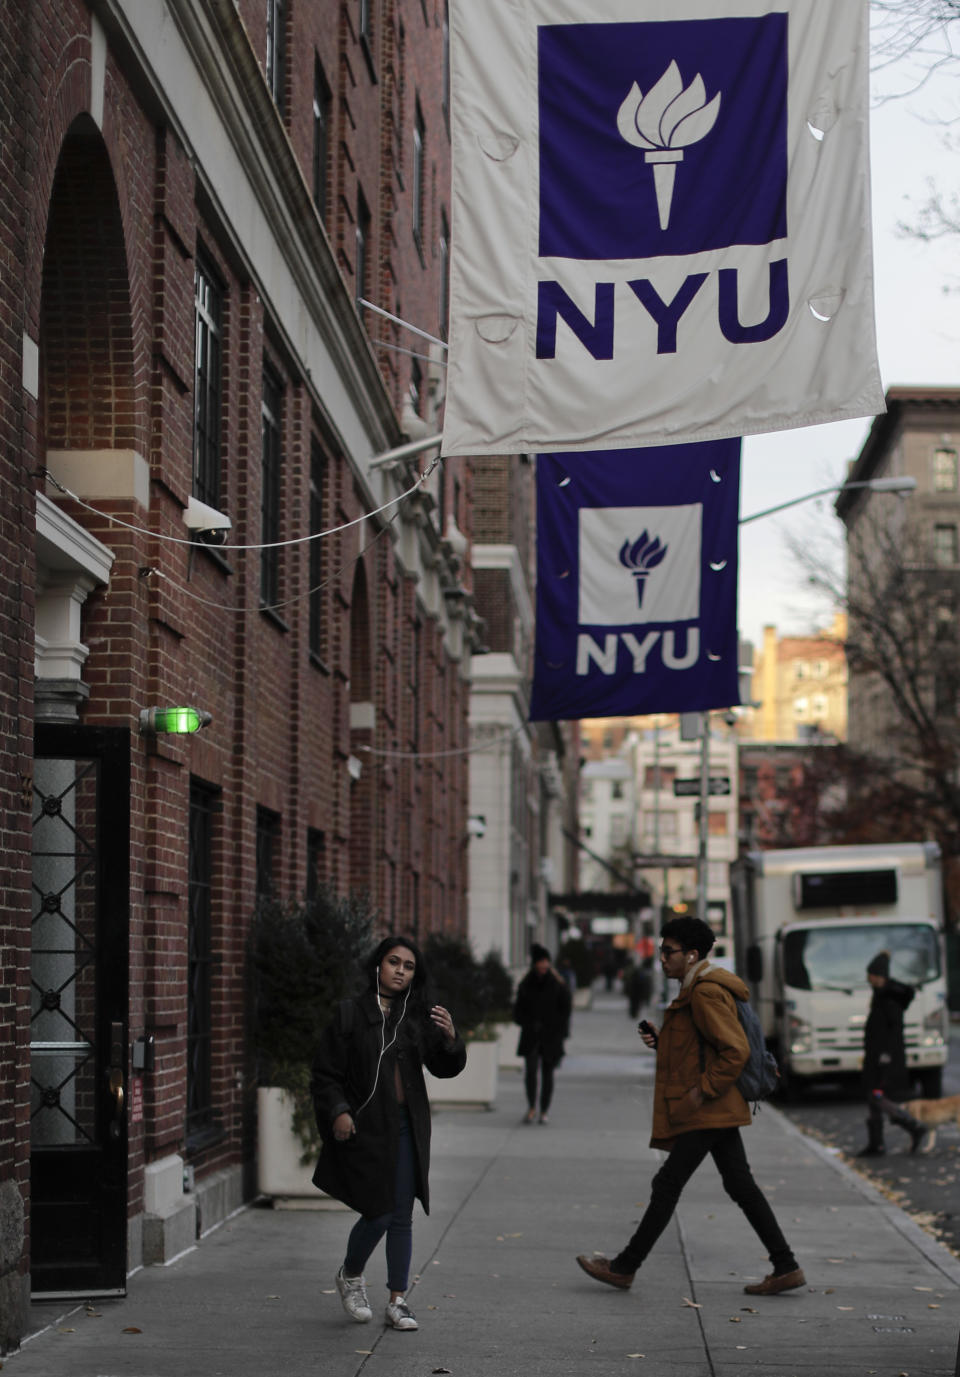 Students walk along Washington Square West in front of New York University's Lipton Hall, Wednesday, Dec. 14, 2016, in New York. New York University has introduced a program to help students save money by putting them up in elderly people's spare bedrooms. The plan has gotten serious consideration from some students straining under the institution's $66,000 annual tuition. (AP Photo/Julie Jacobson)